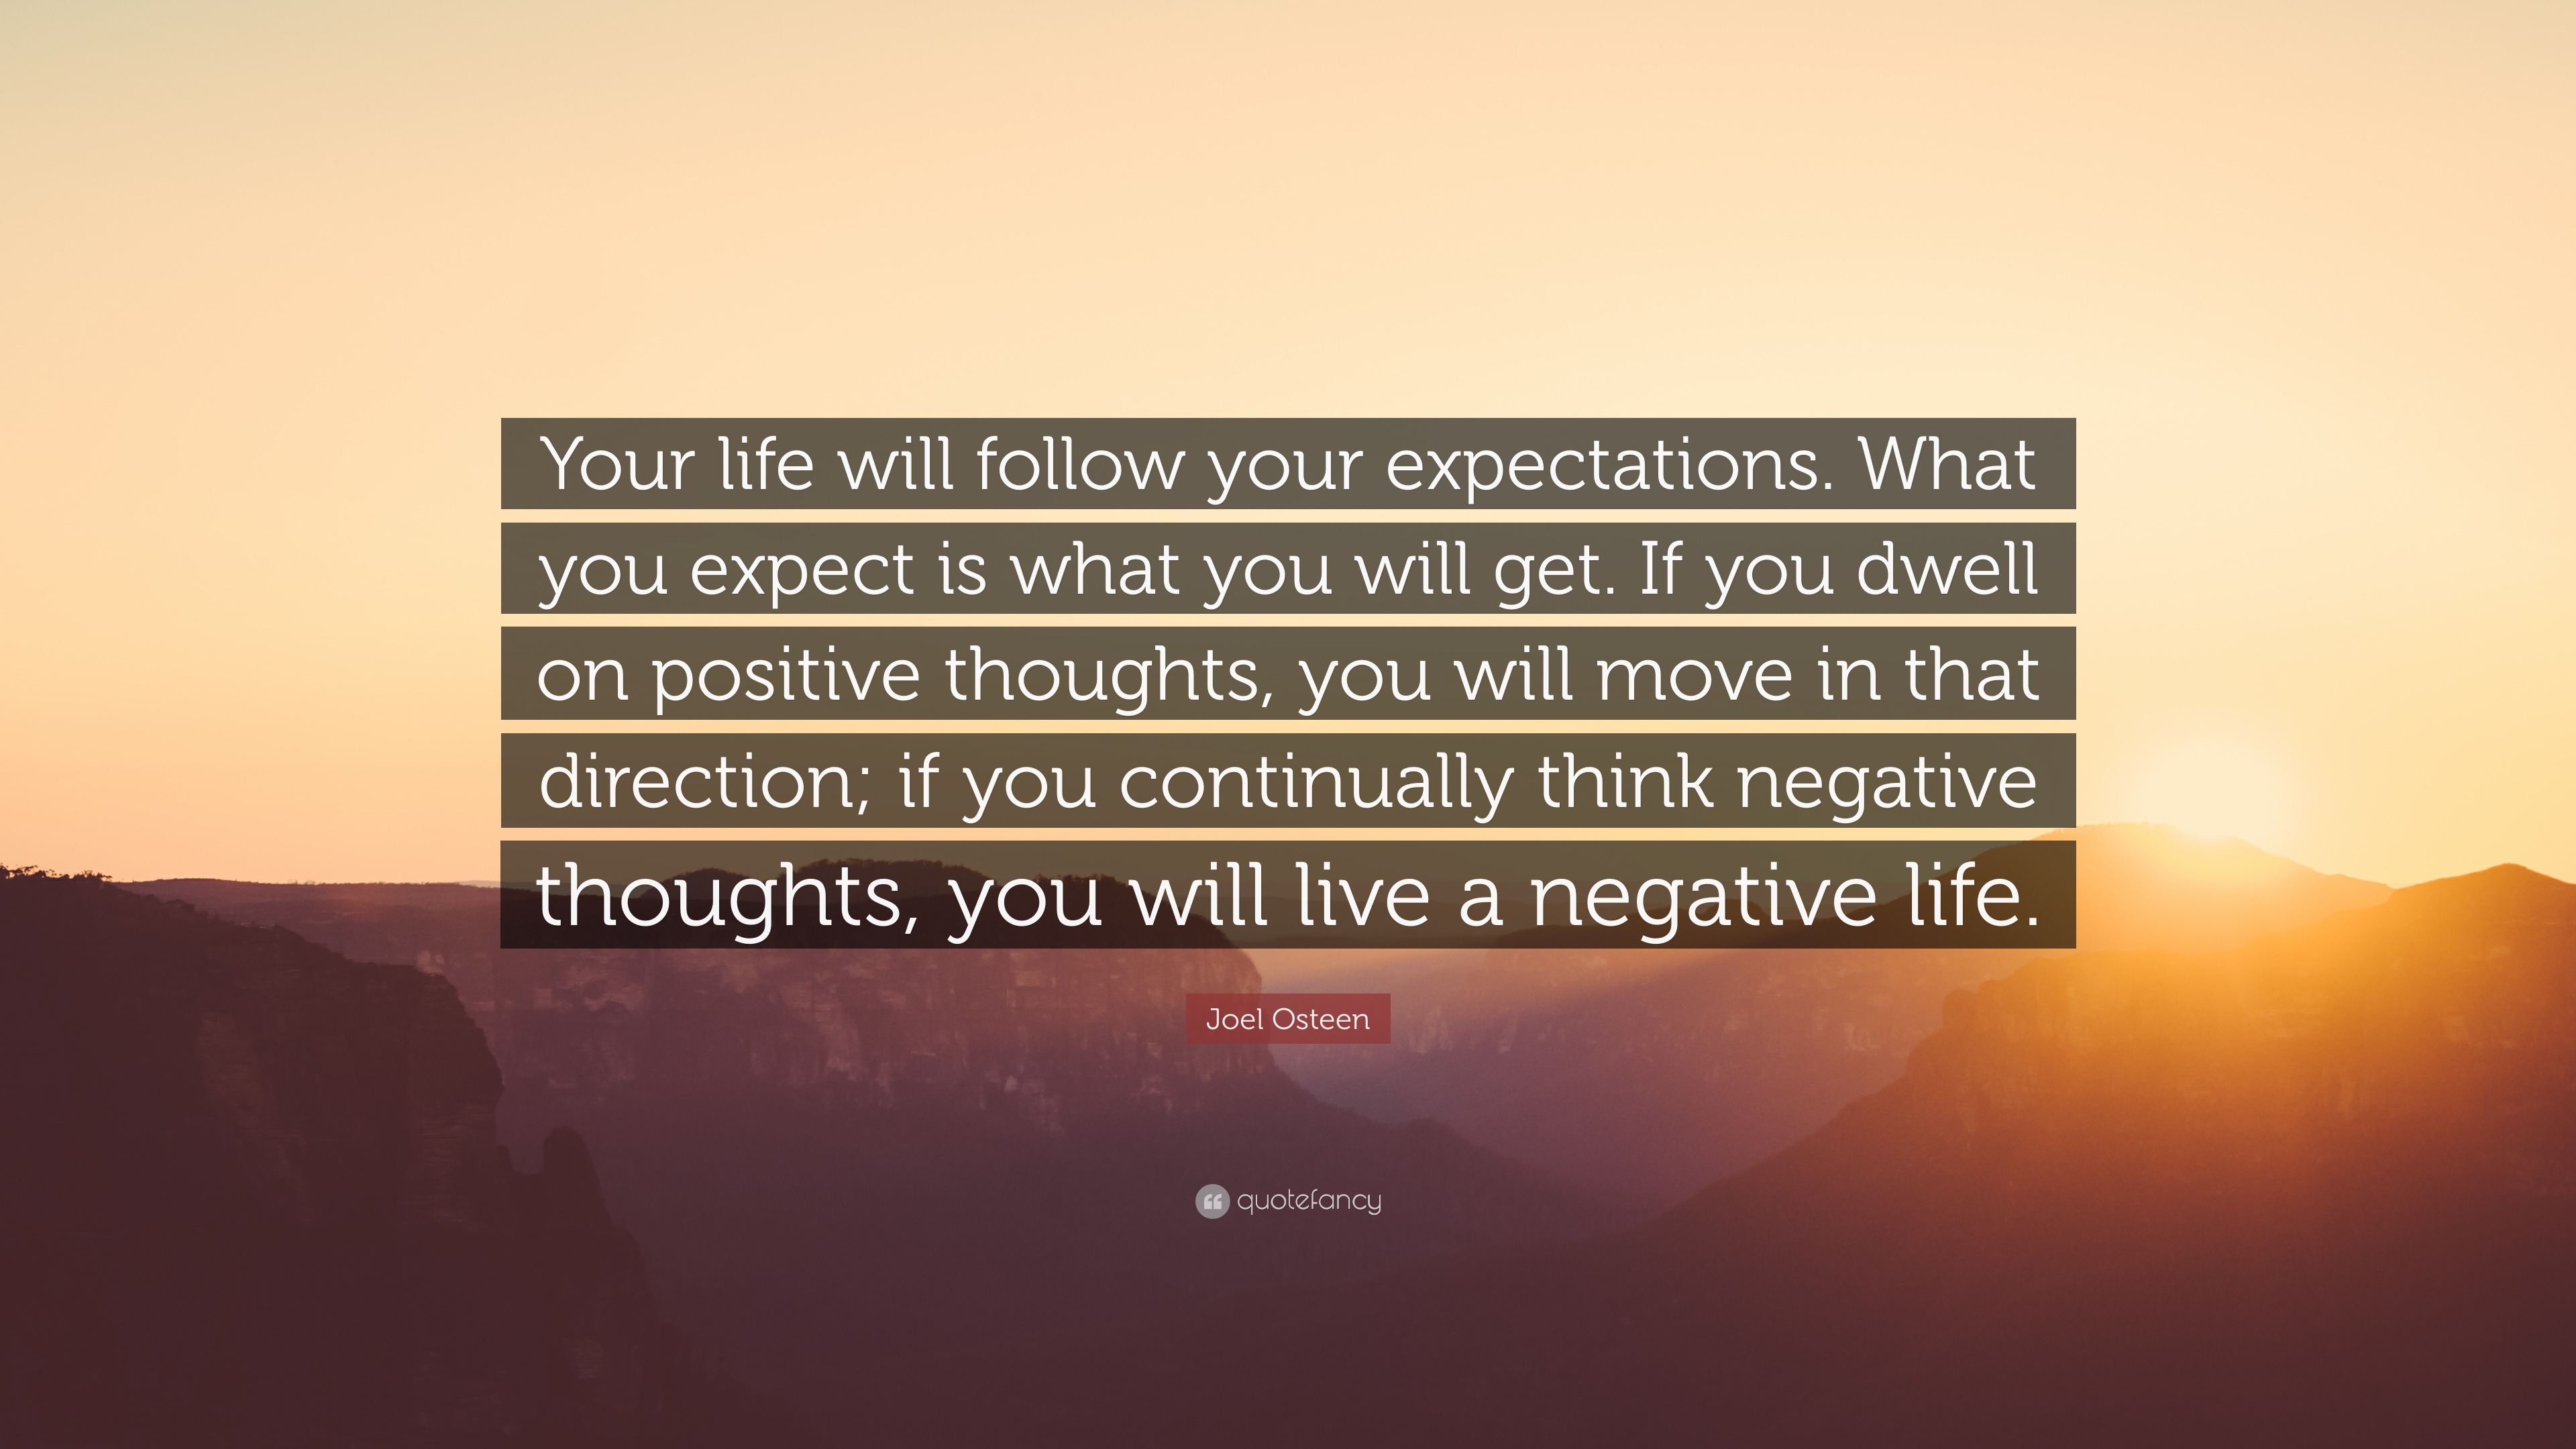 Joel Osteen Quote Your Life Will Follow Your Expectations What You Expect Is What You Will Get If You Dwell On Positive Thoughts You Wi 10 Wallpapers Quotefancy